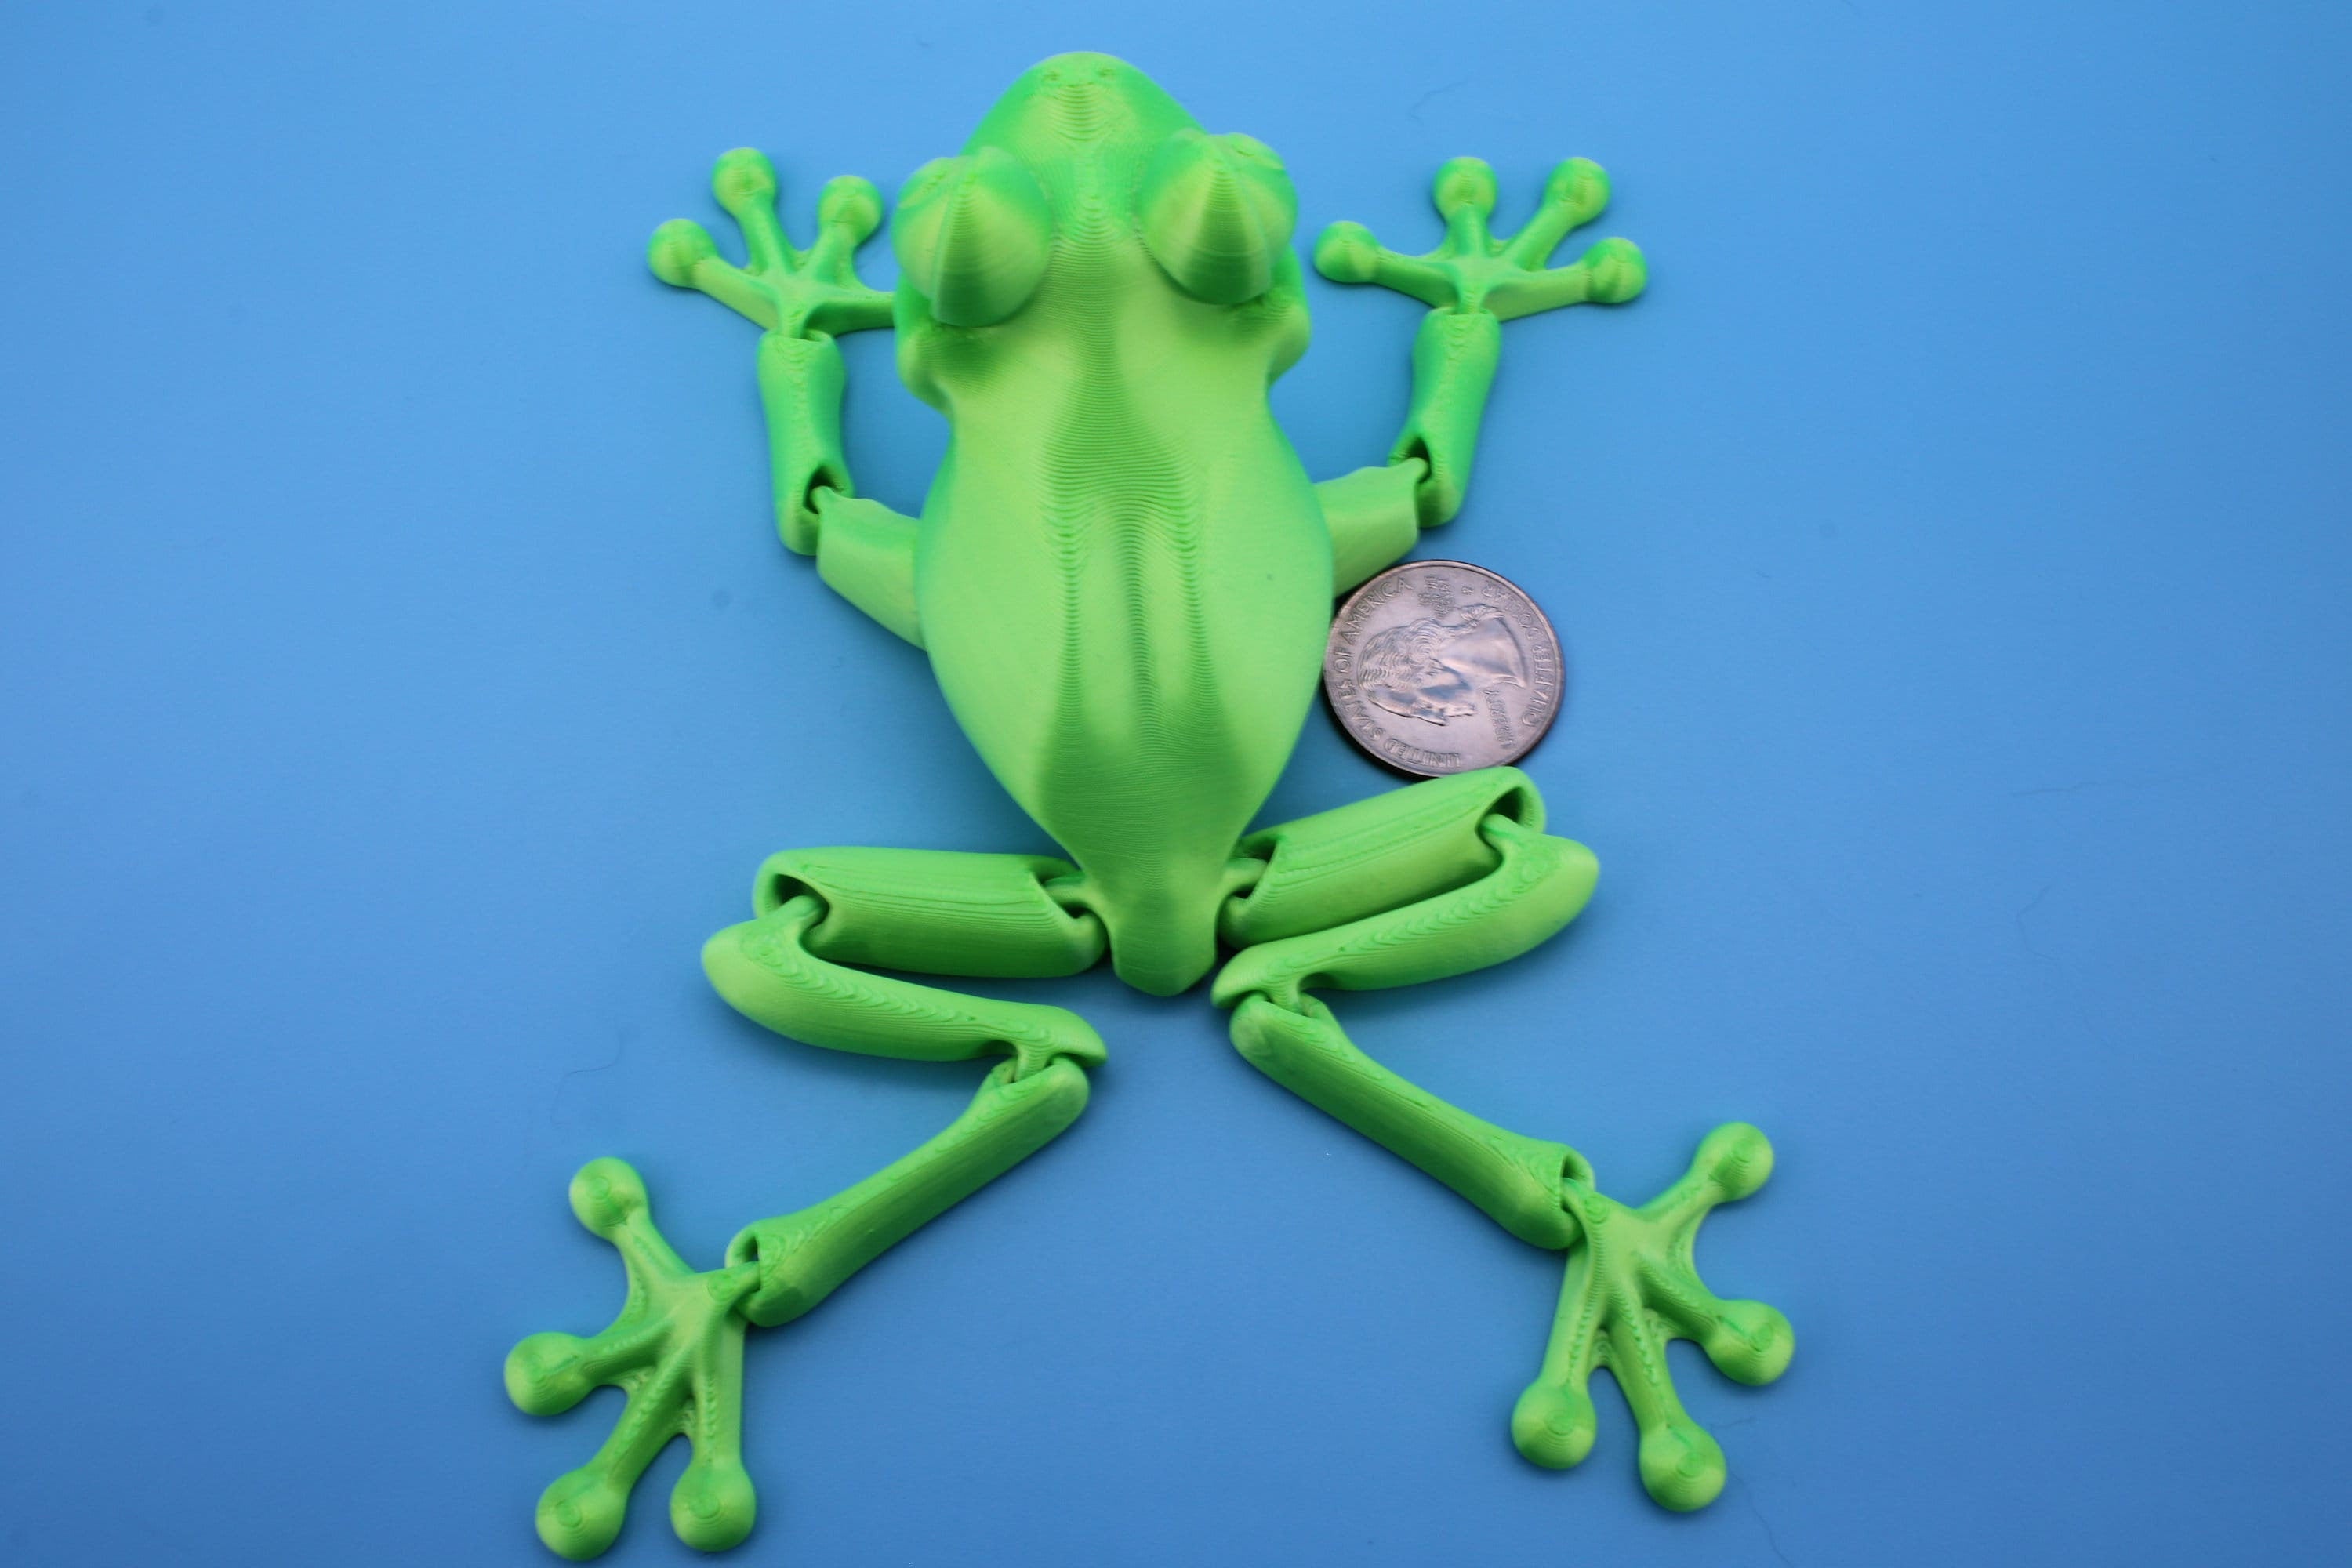 Green Frog | Cute Flexi Toy | Articulating Frog | 3D printed Unique Fidget | Desk Buddy | Sensory Toy | Stim Toy | Small Flexi Toy.